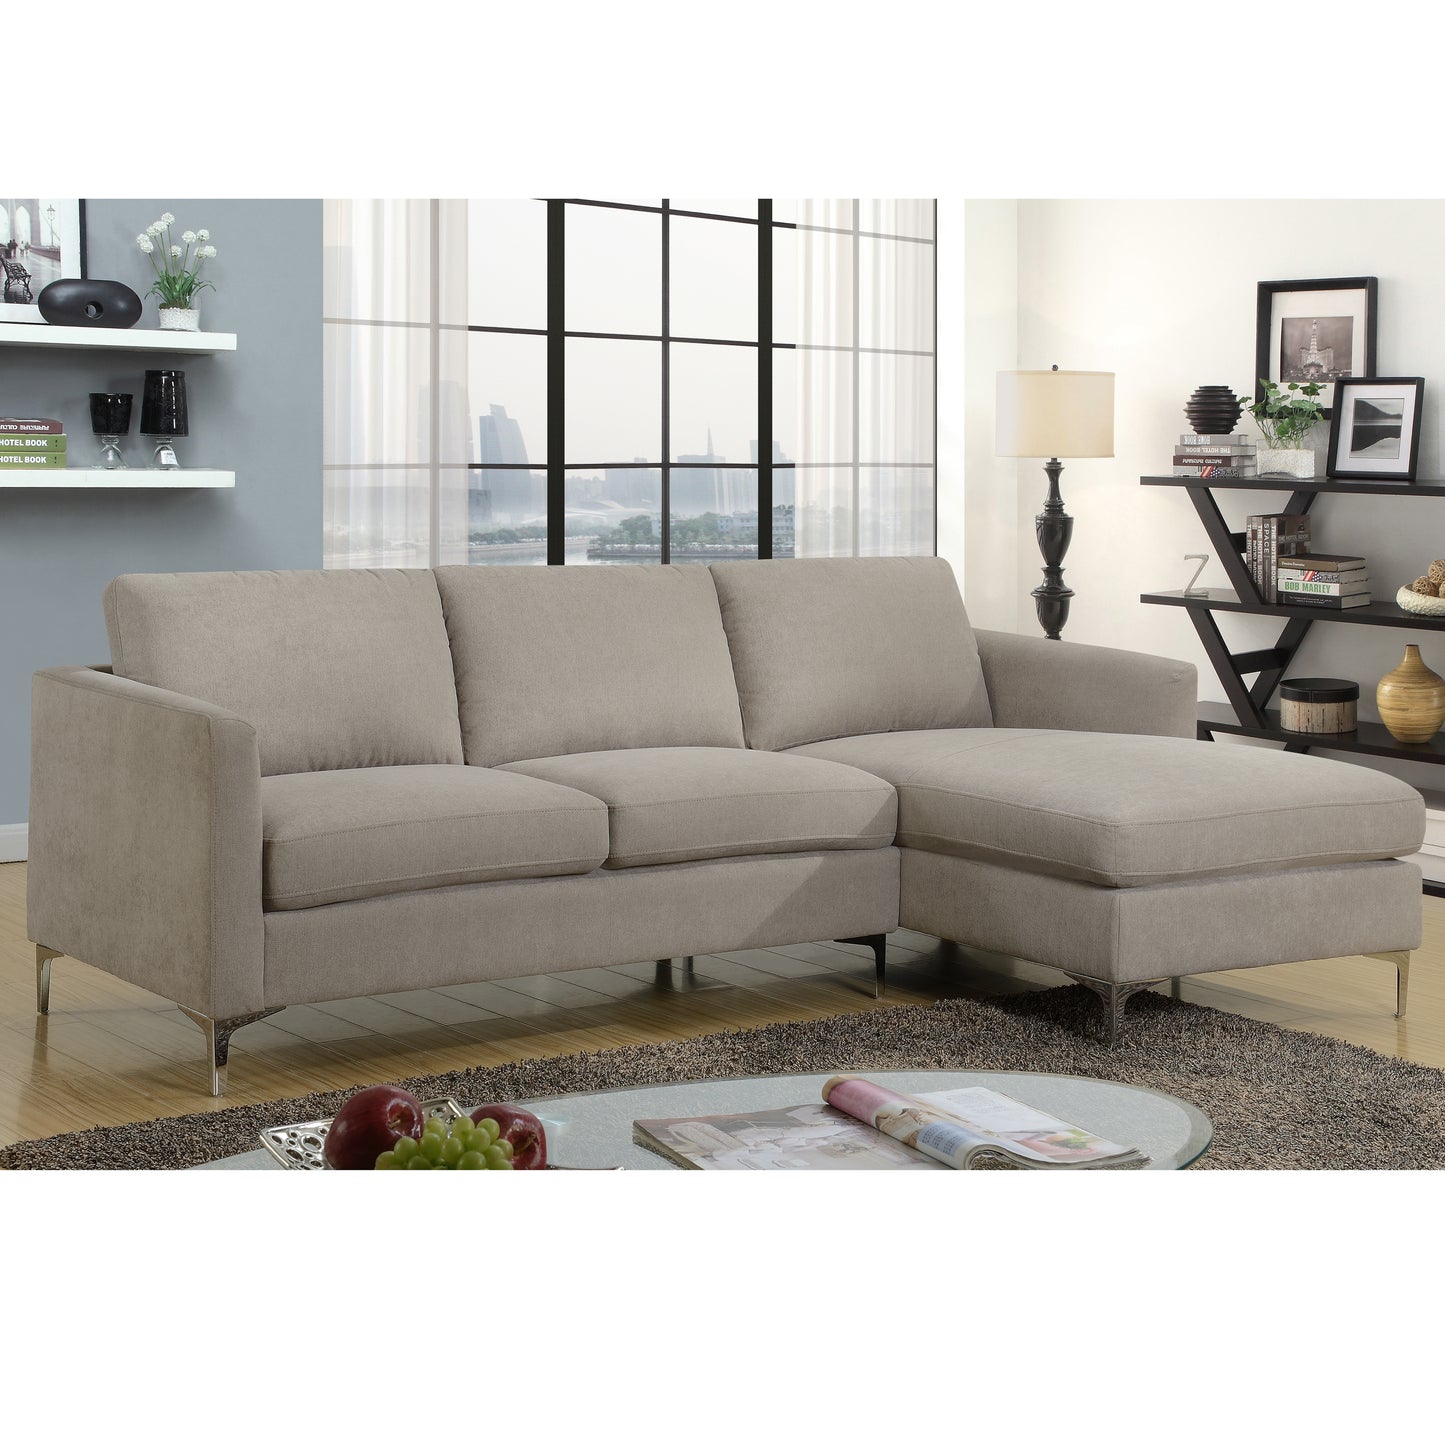 Alina Modern Sandy Grey Fabric Sectional Sofa with Removable Cushions